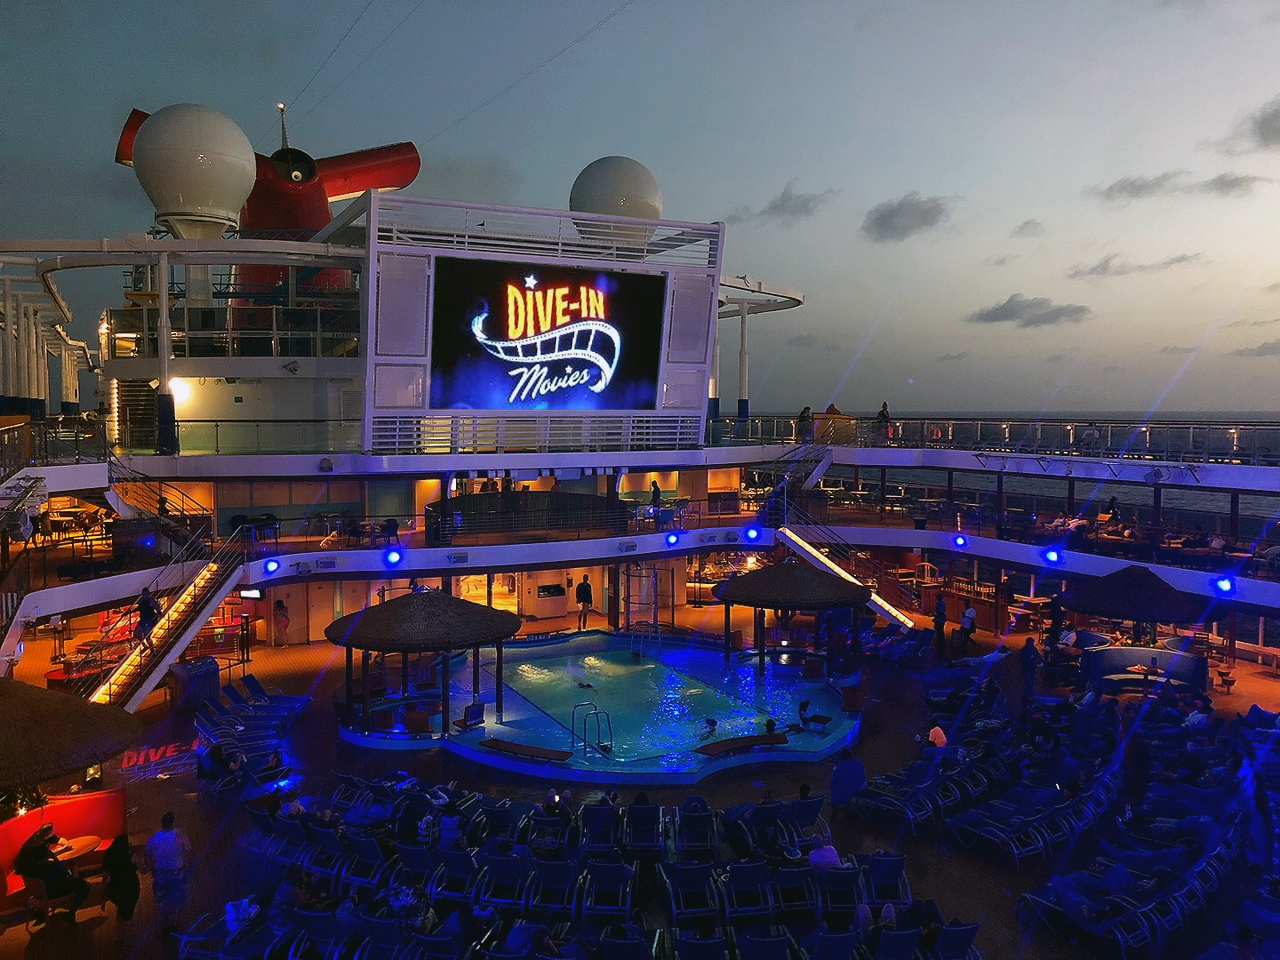 How To Enjoy Divein Movies on Carnival Cruise Ships Cruise Spotlight